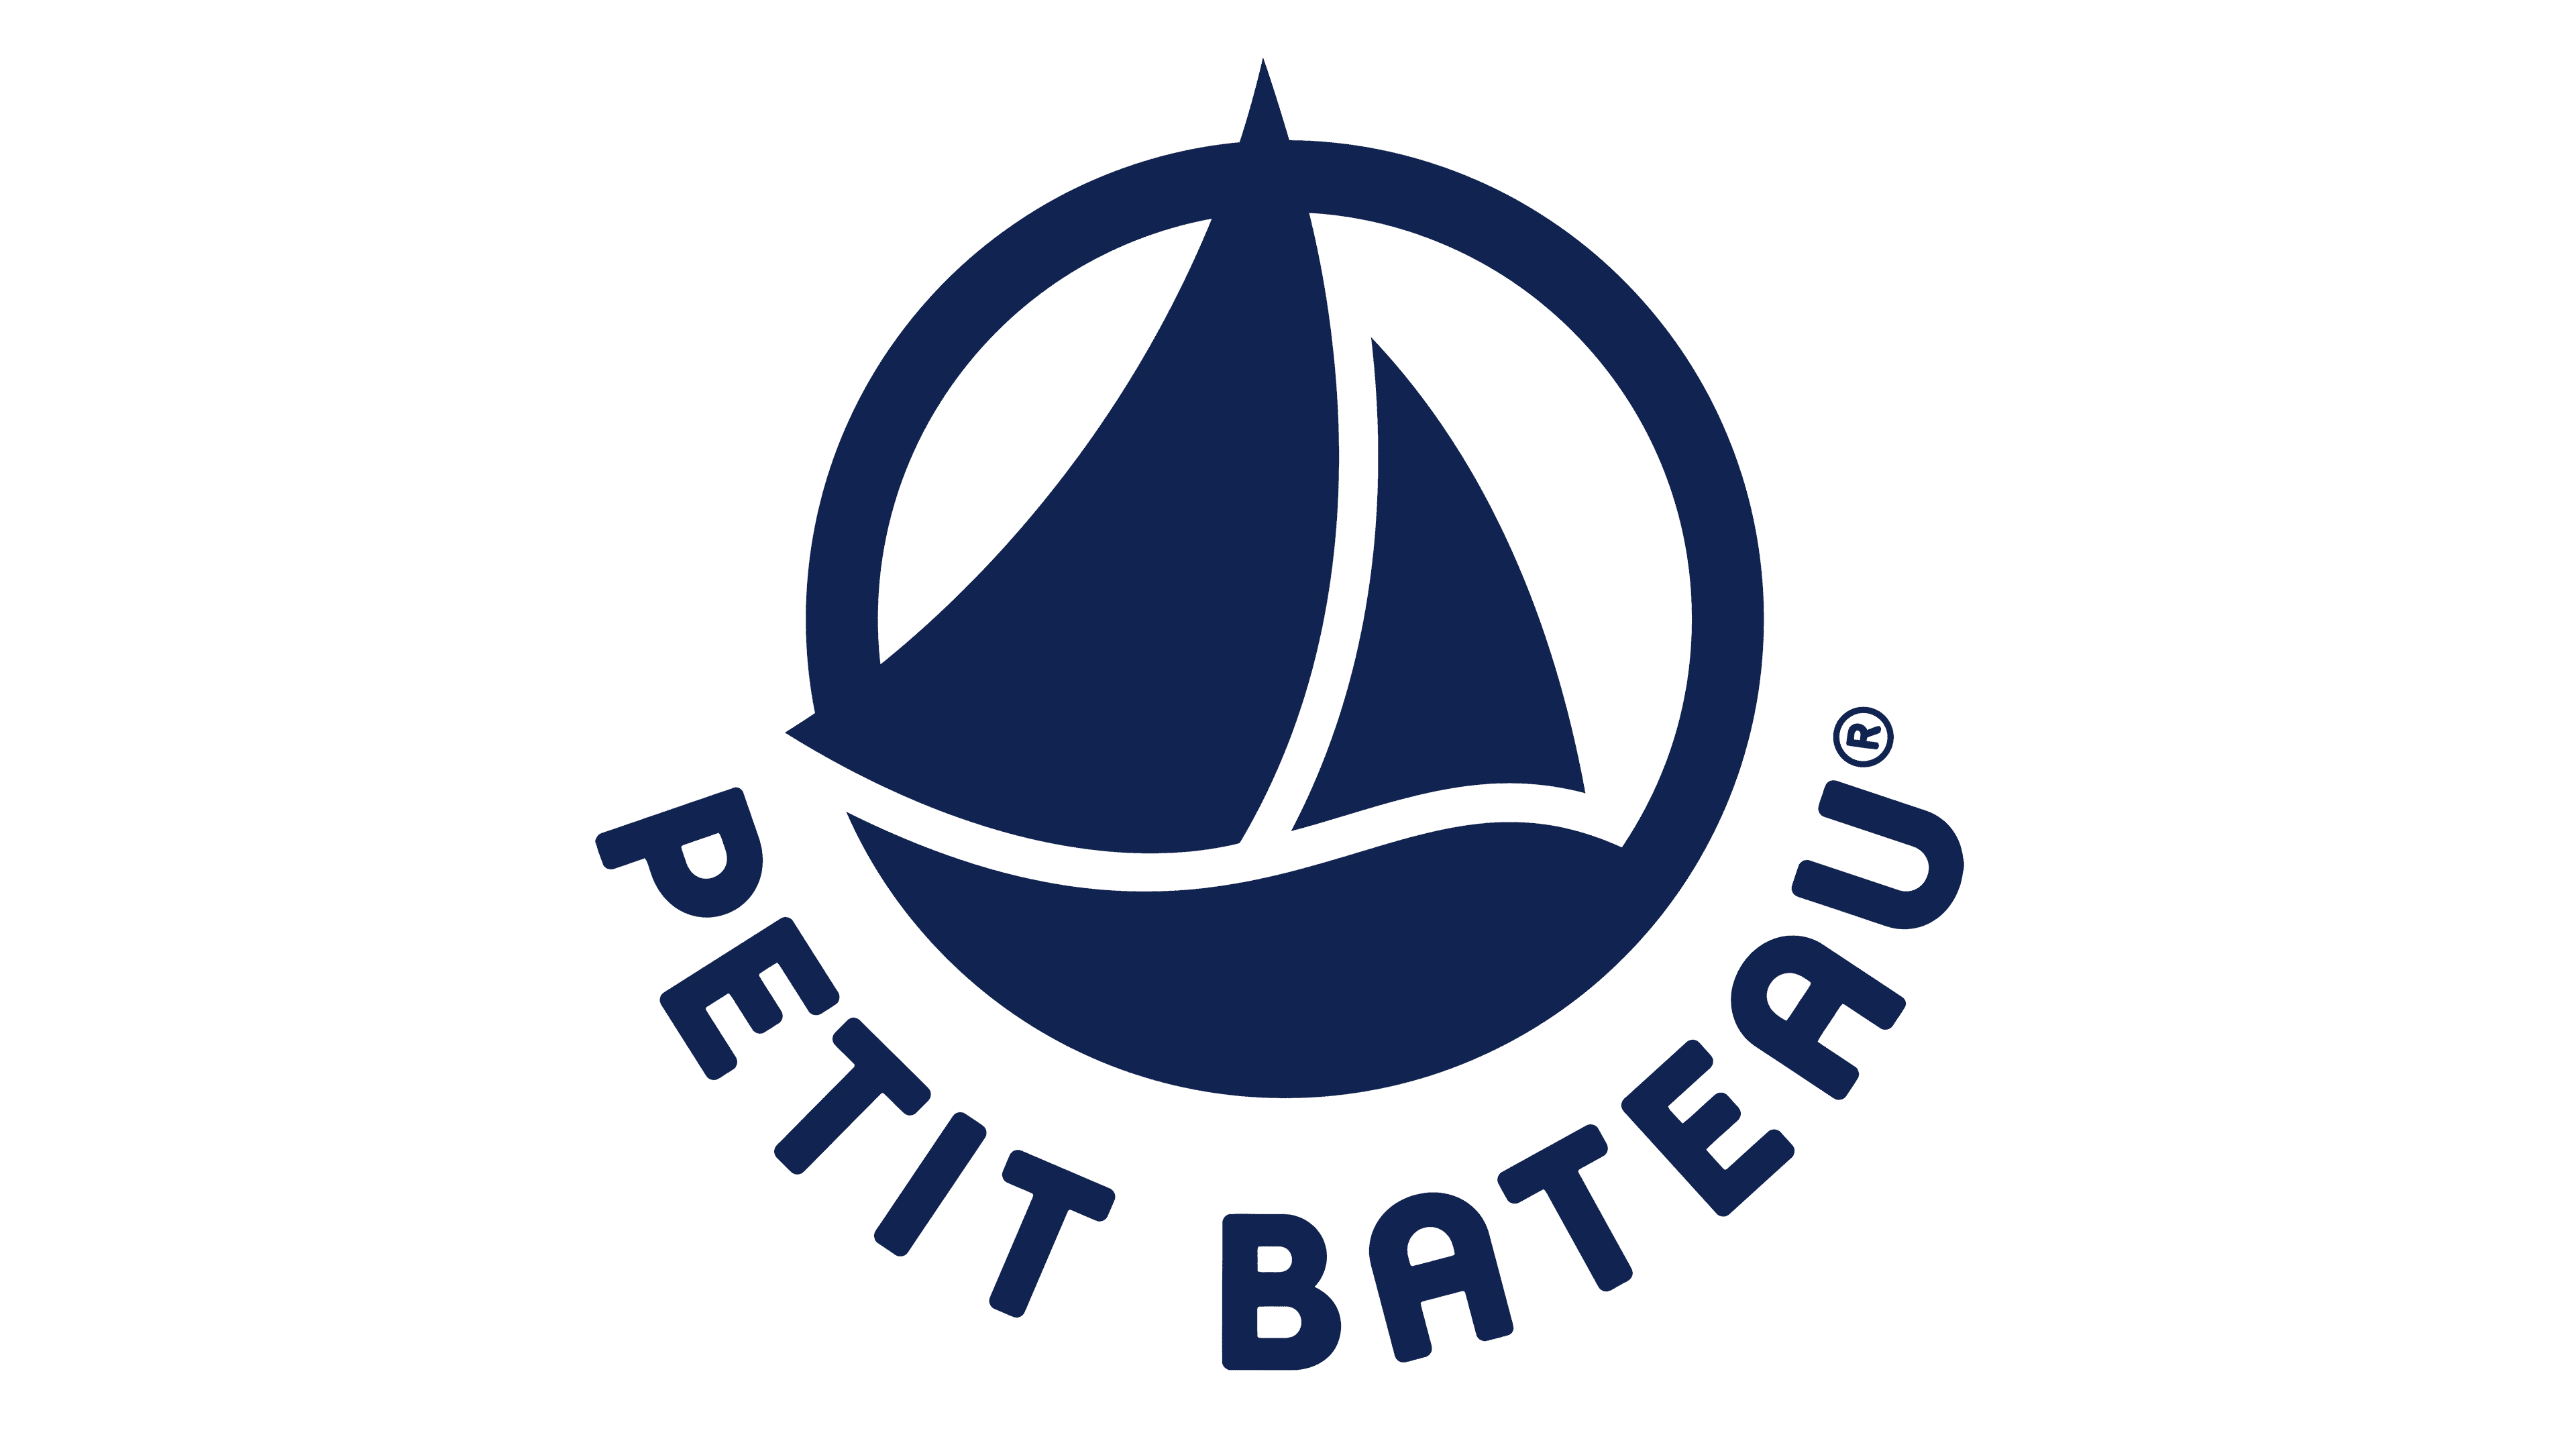 Petit Bateau Logo and symbol, meaning, history, PNG, brand